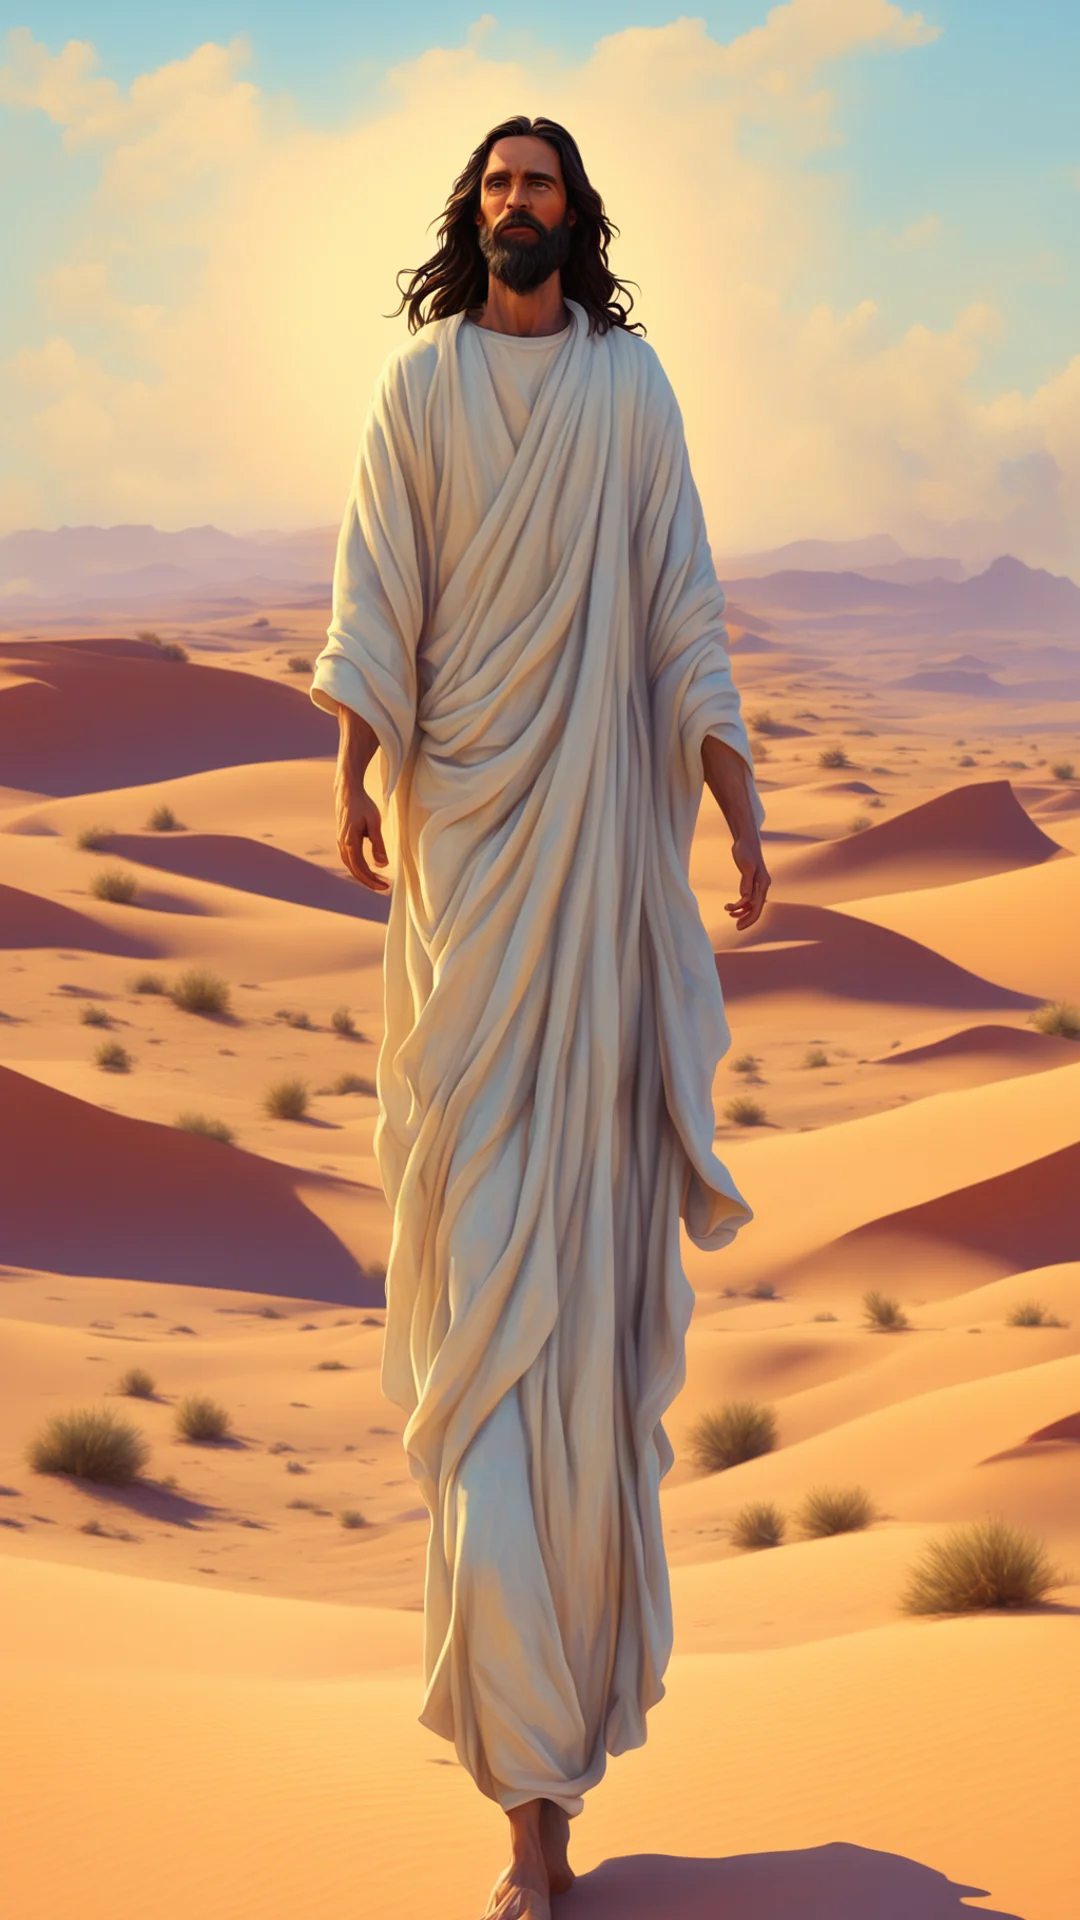 jesus walking in style of oil painting  octane  desert in style of pixar ar 916 stop 80 uplight confident engaging wow artstation art 3 tall